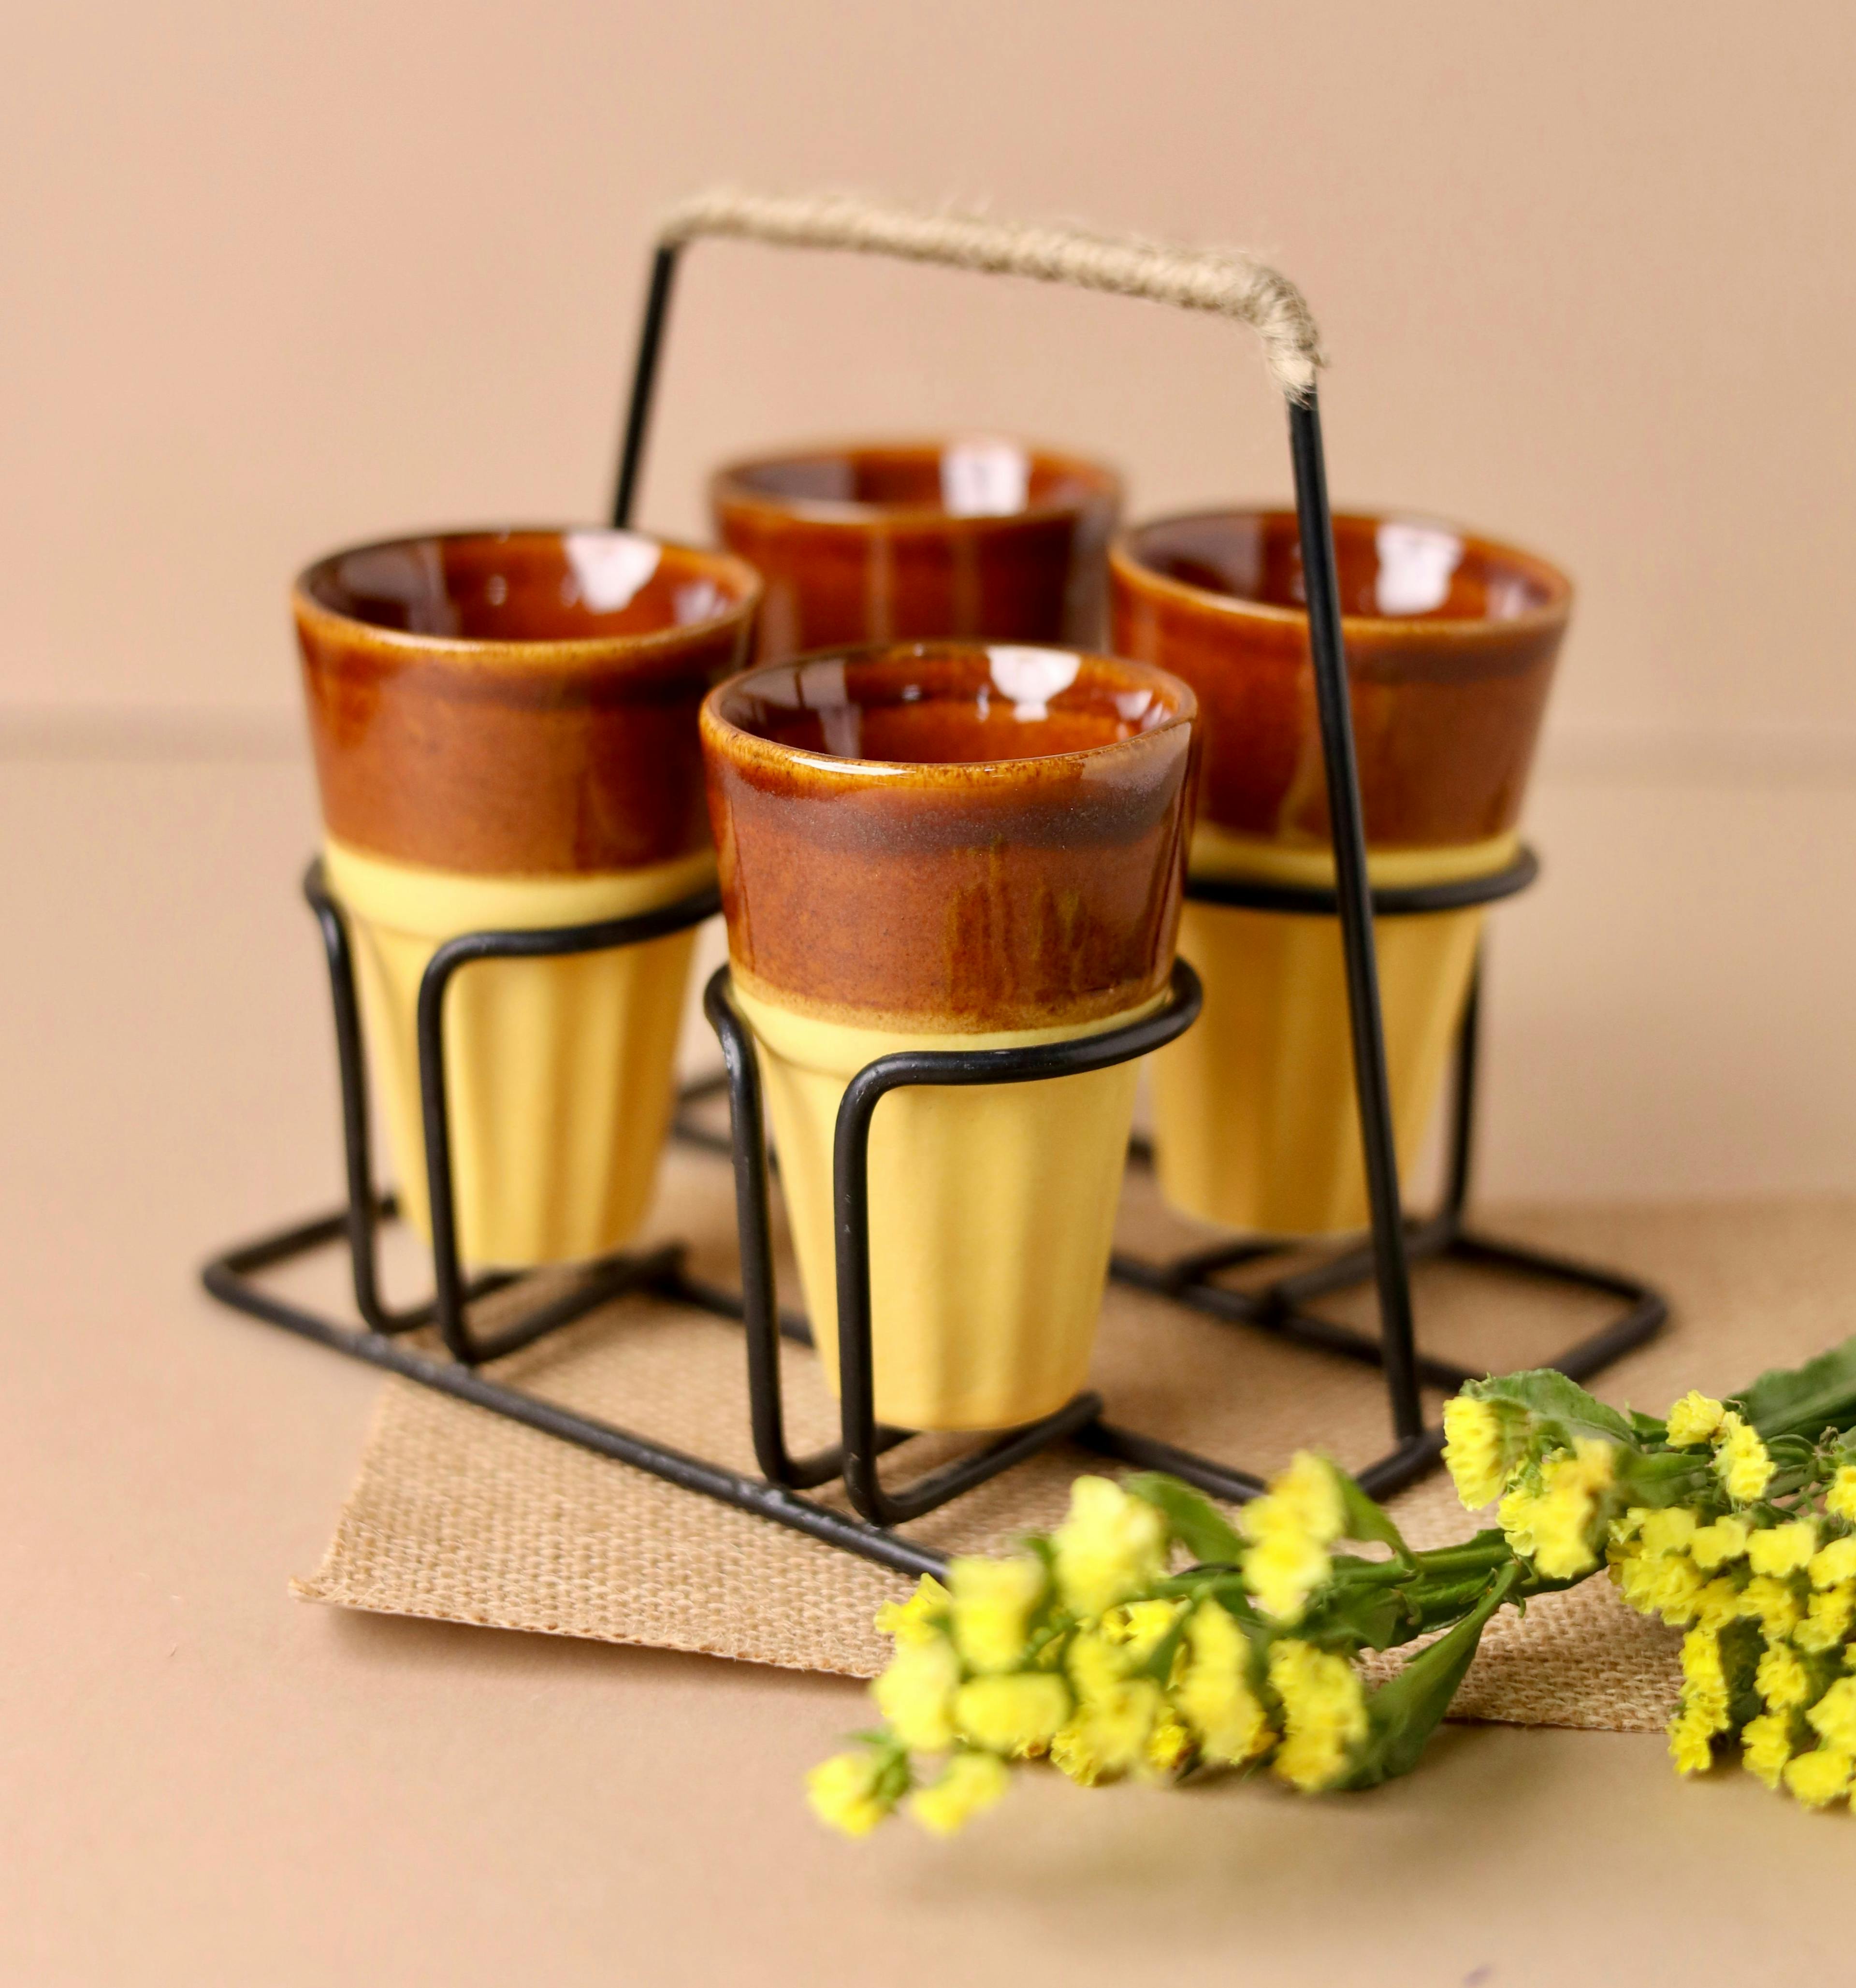 4 Chai Glasses with Stand - Yellow and Brown, a product by Olive Home accent